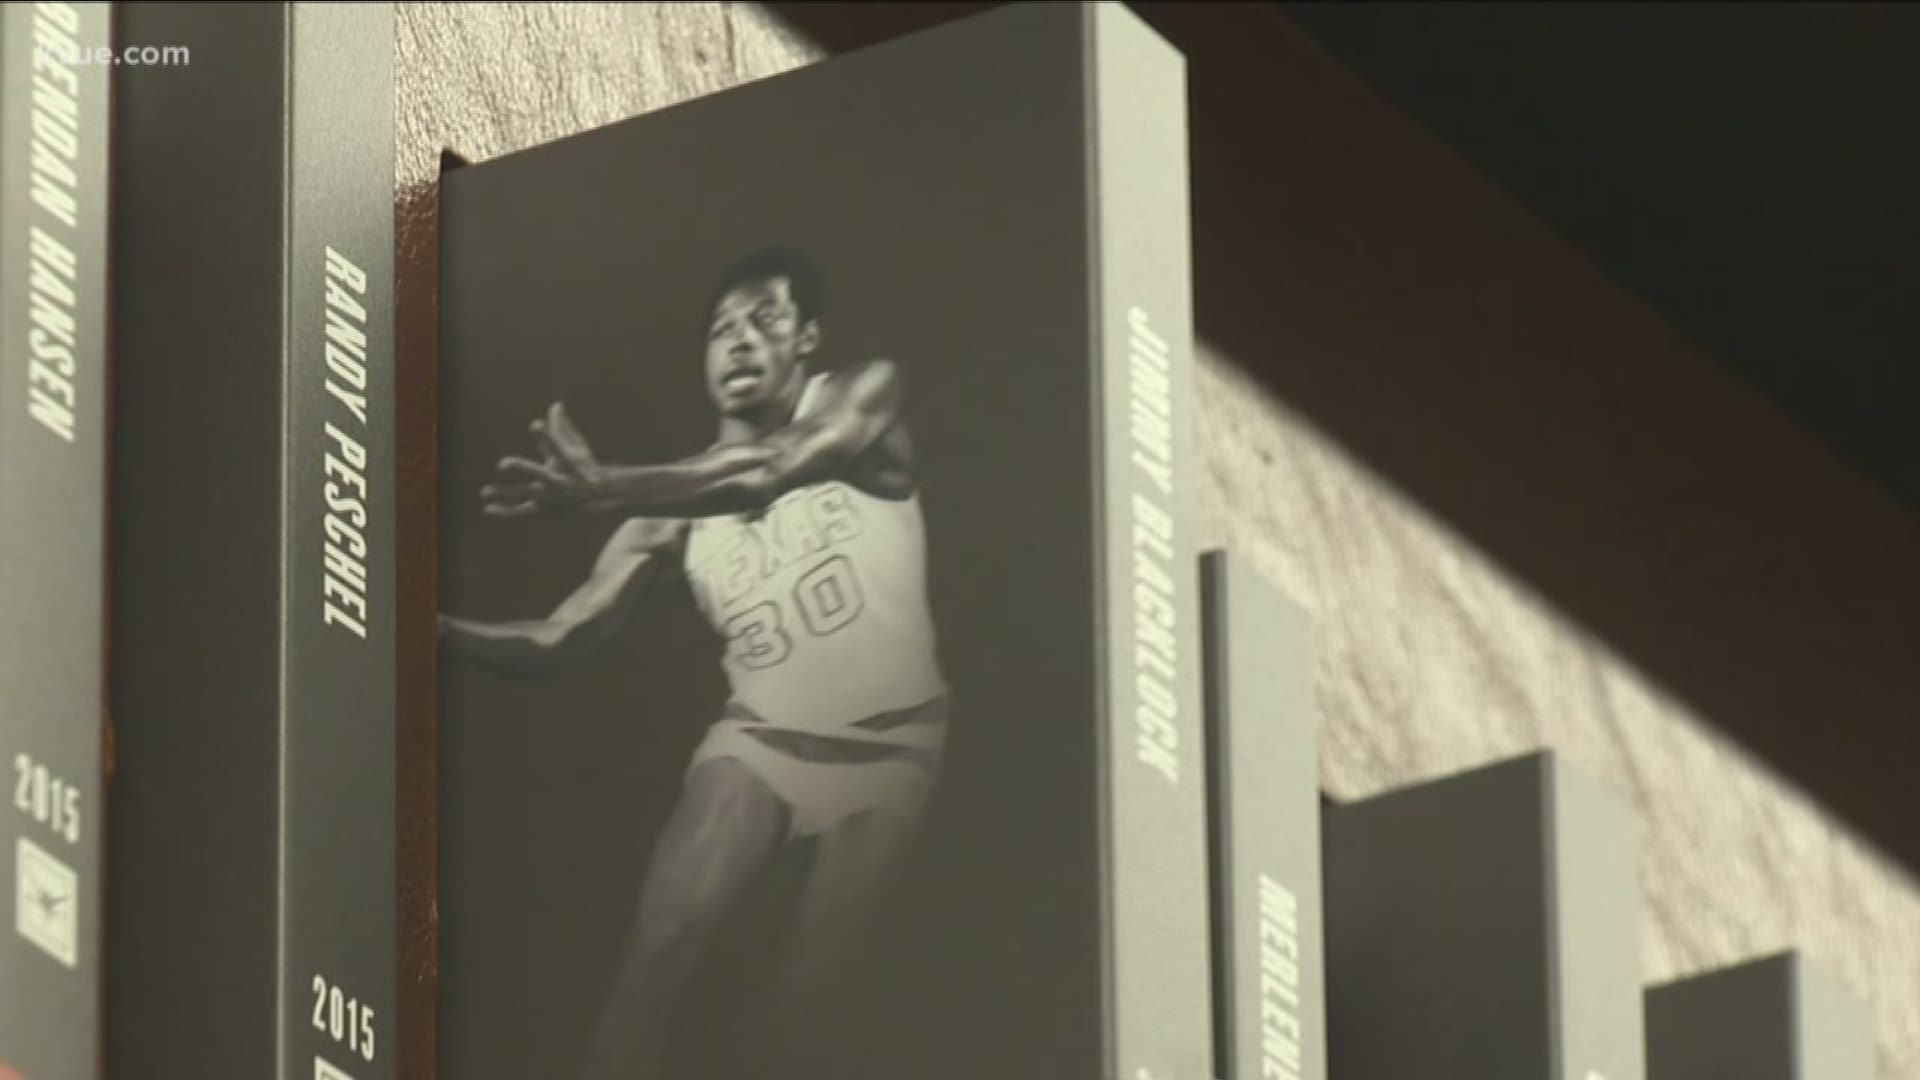 A Texas Longhorn legend, Jimmy Blacklock was recognized at the Frank Erwin Center by the Harlem Globetrotters. Blacklock was inducted into the "Legends" ring.